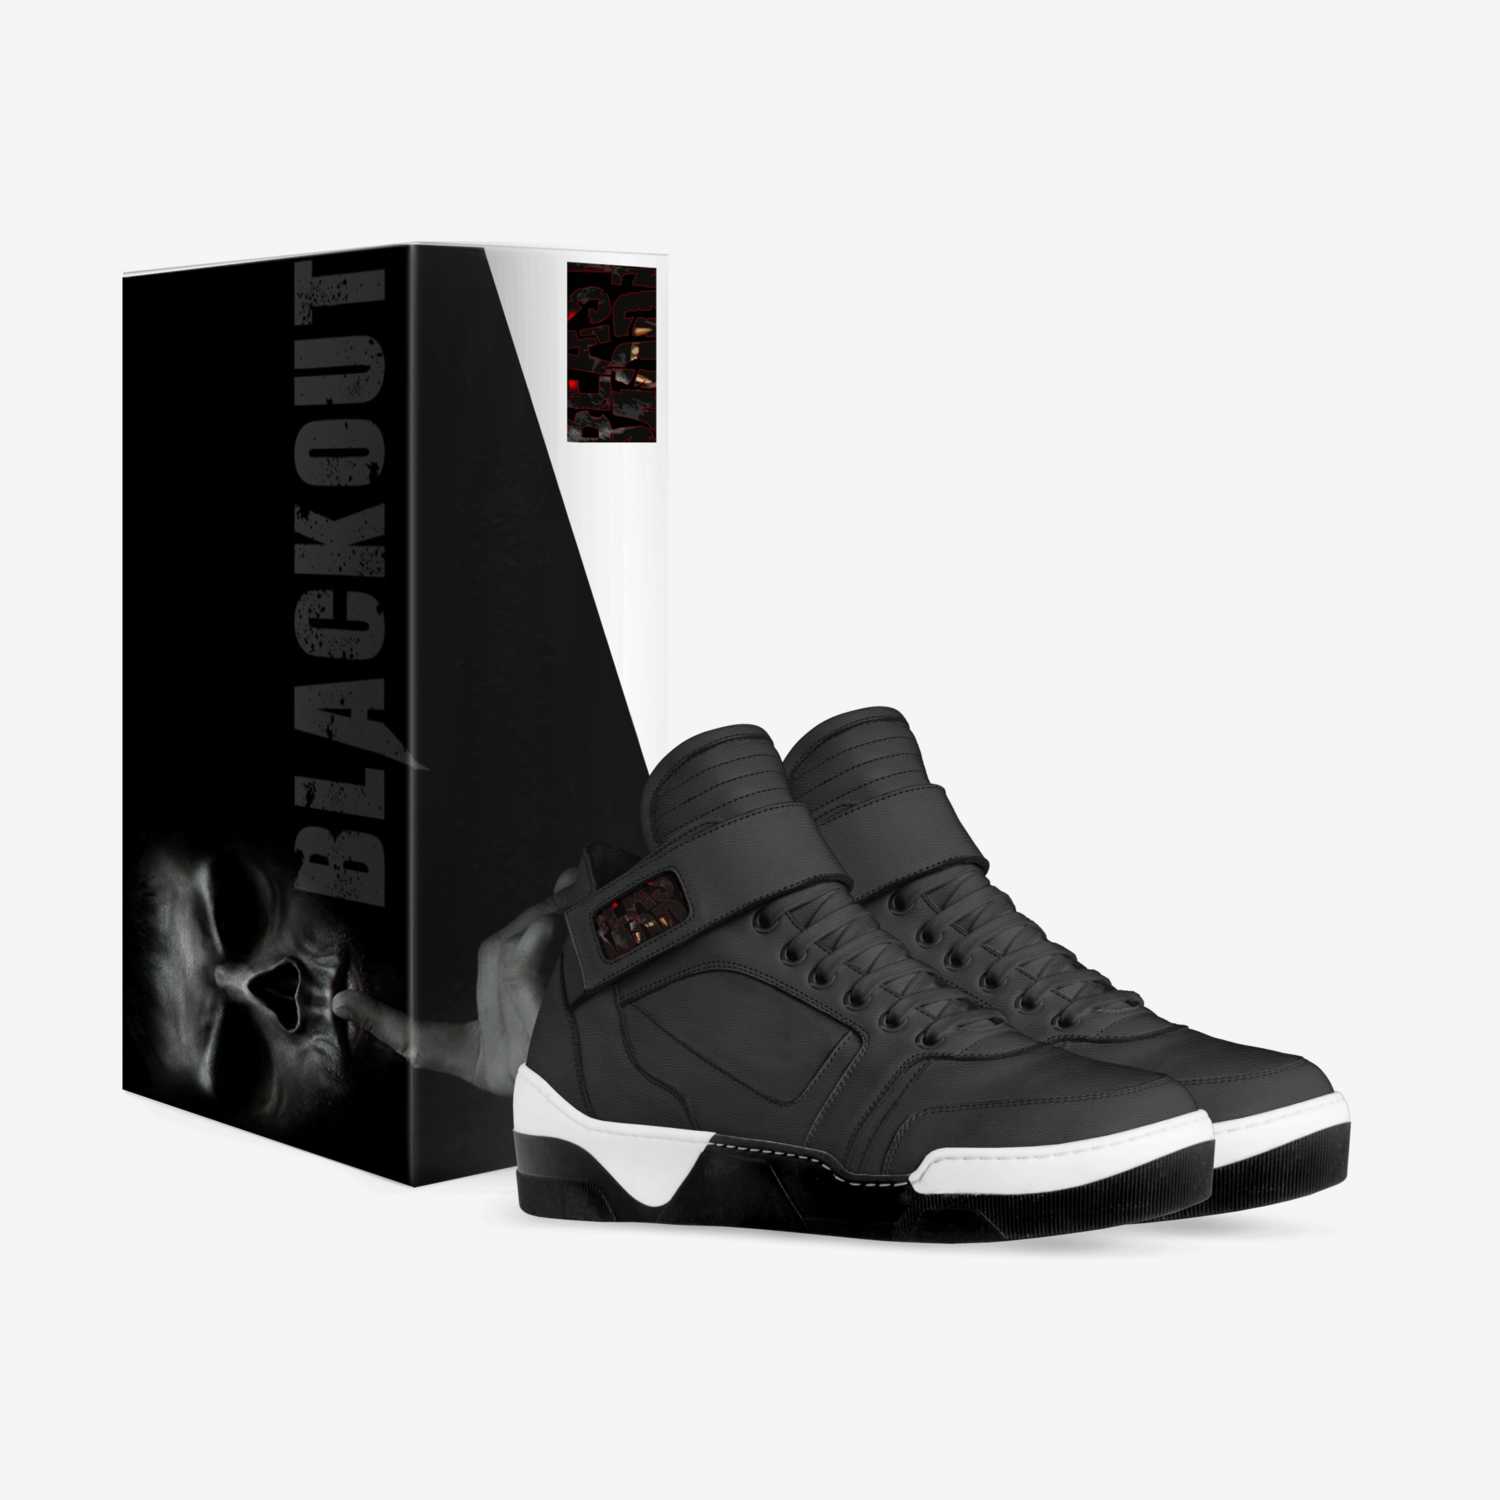 Blackouts 2  custom made in Italy shoes by Darrius U Will Get Sued For Taking My Ideas Fair Warning | Box view